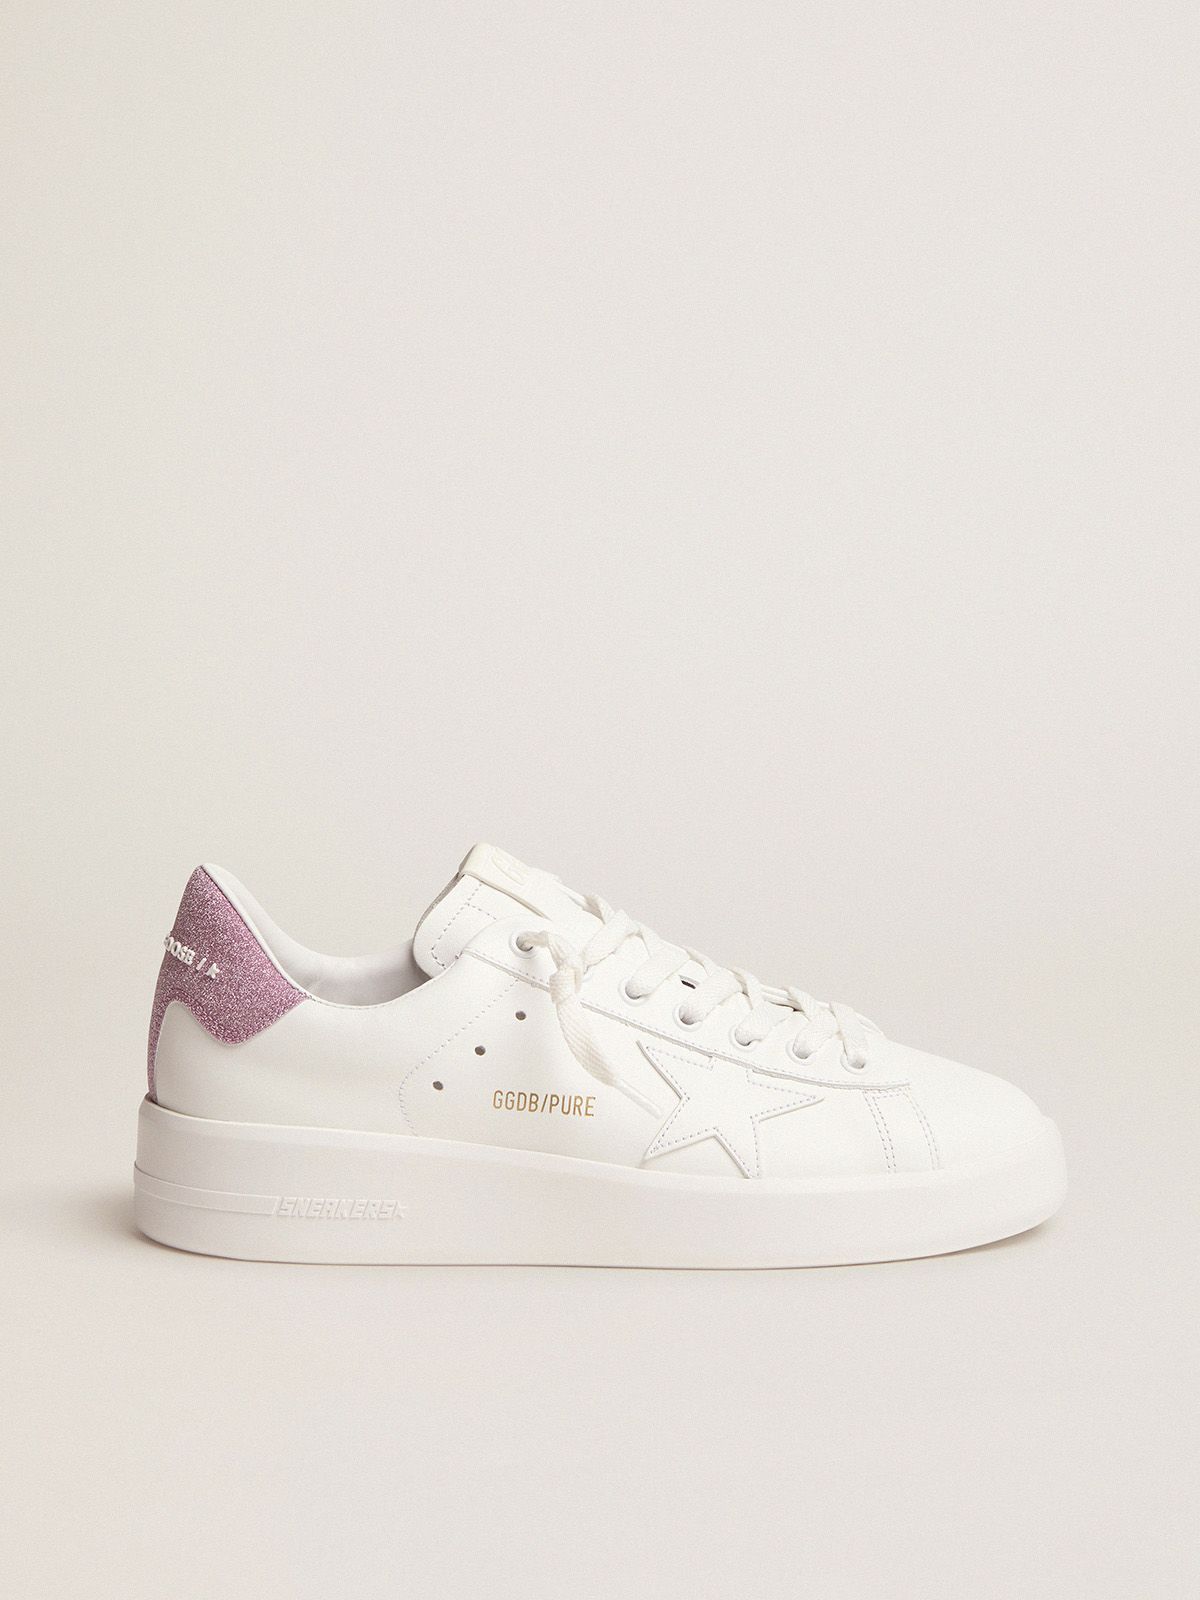 Purestar white leather with pink glitter heel tab | Golden Goose